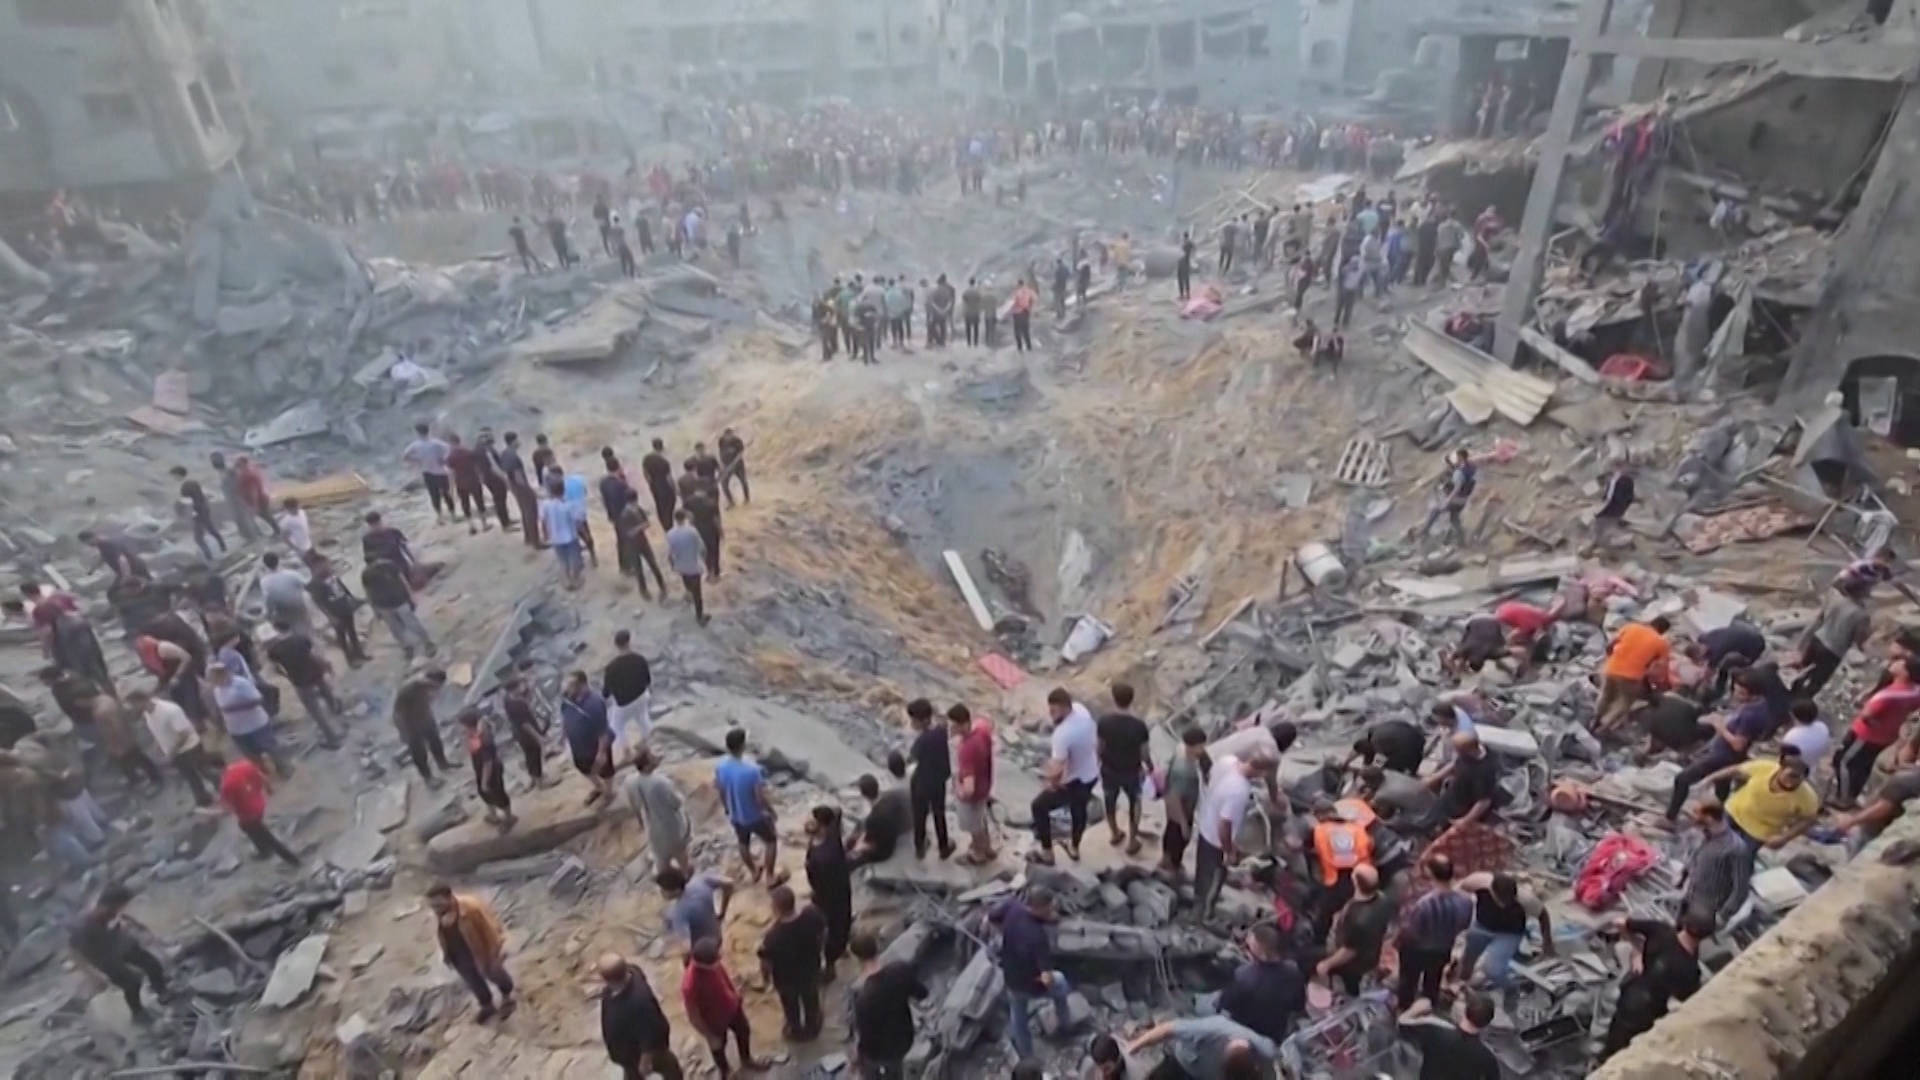 Israel bombs the Jabaliya refugee camp in Gaza, killing at least 50 people while overcrowded hospitals in the Gaza Strip are on the verge of disaster.